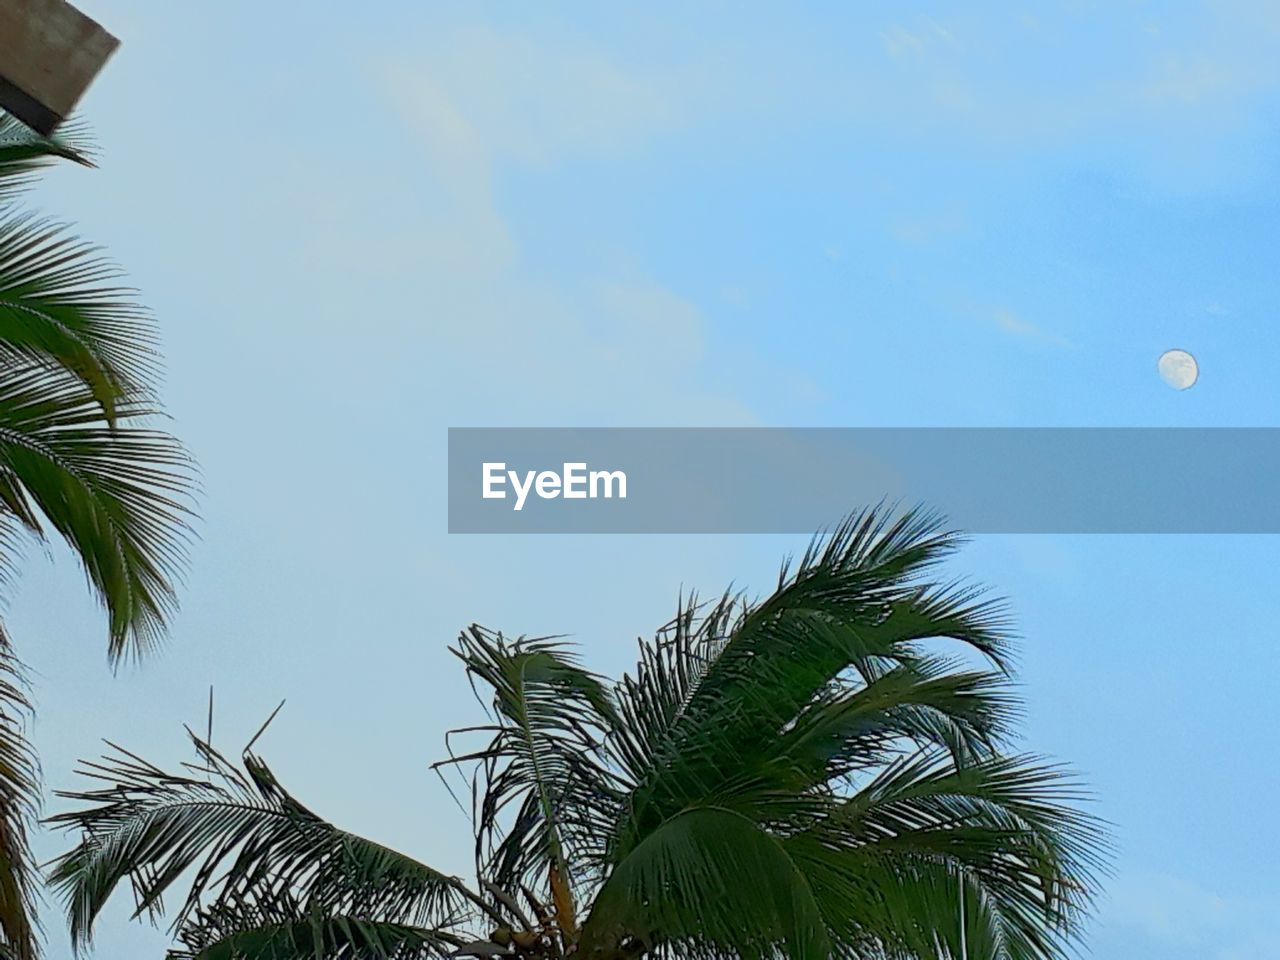 LOW ANGLE VIEW OF PALM TREE AGAINST CLEAR SKY